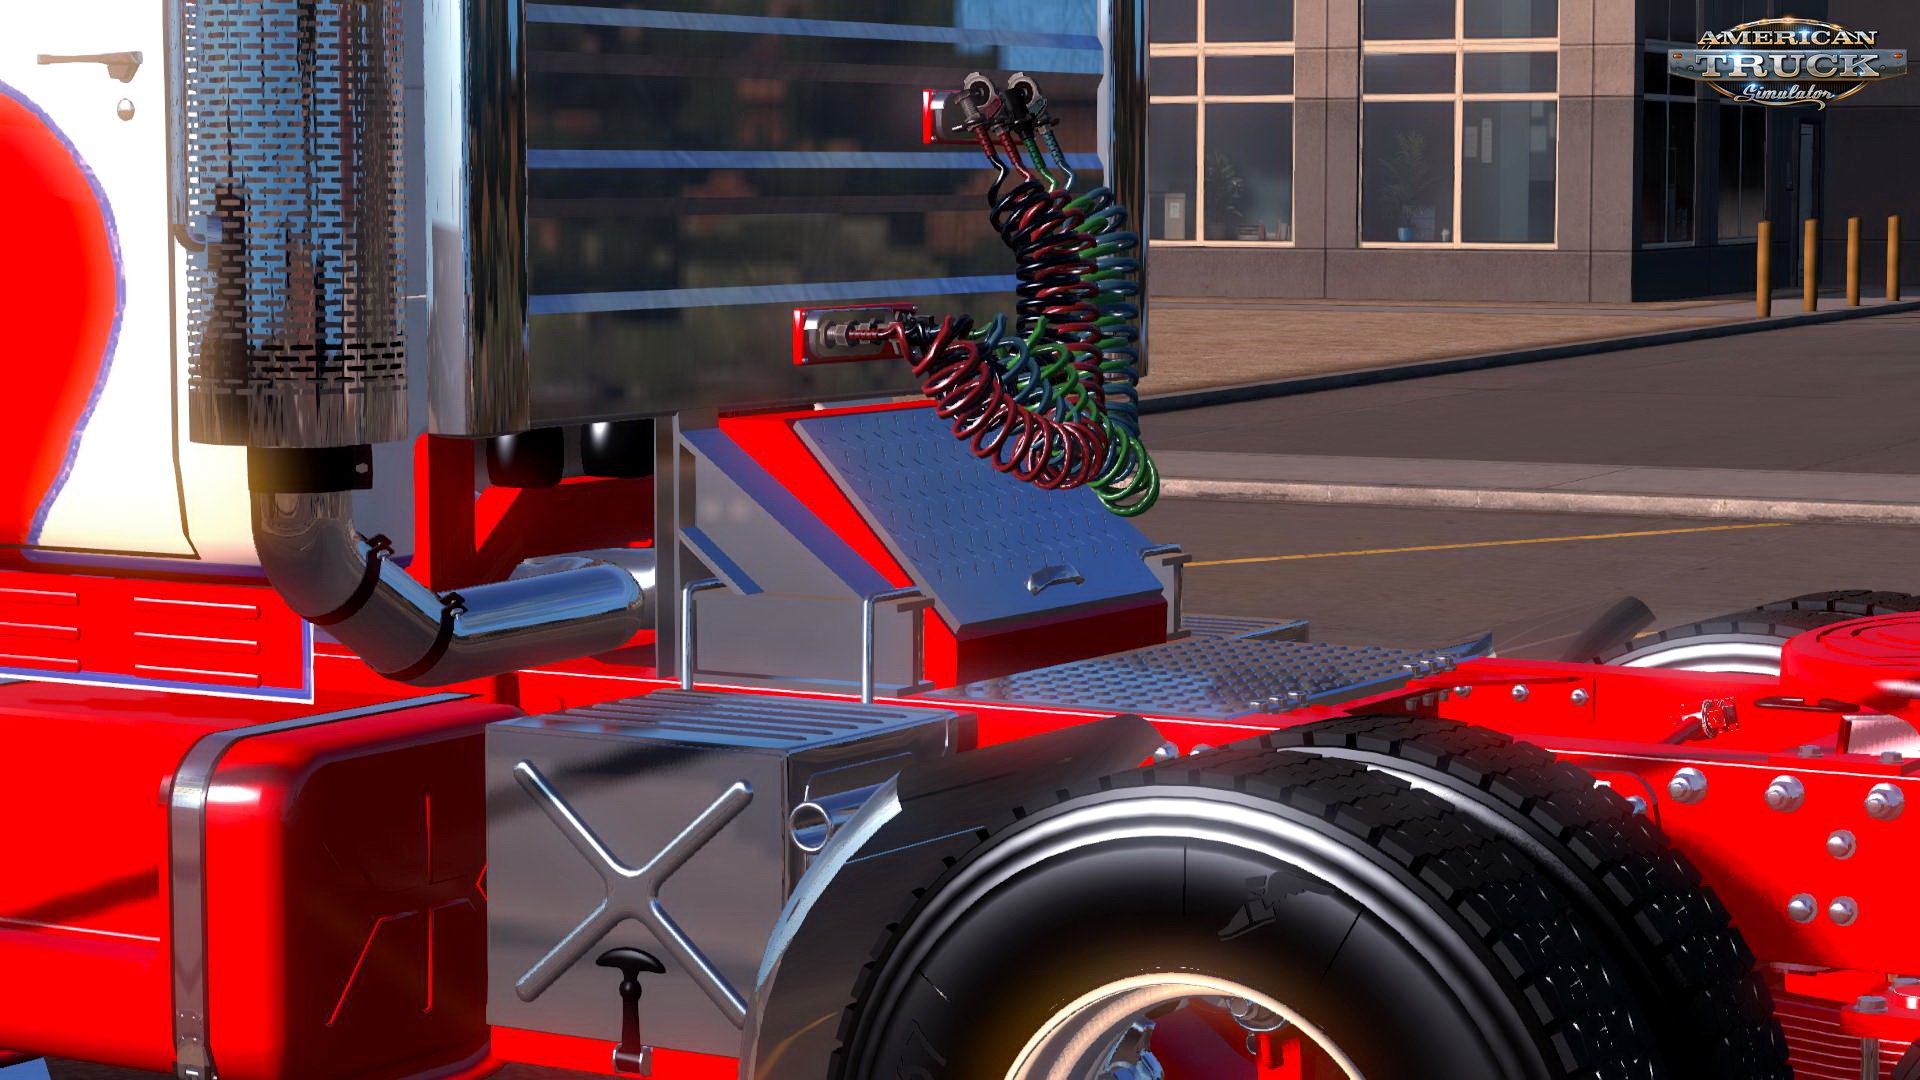 Trailer Cables High Detail v1.0 (1.32.x)